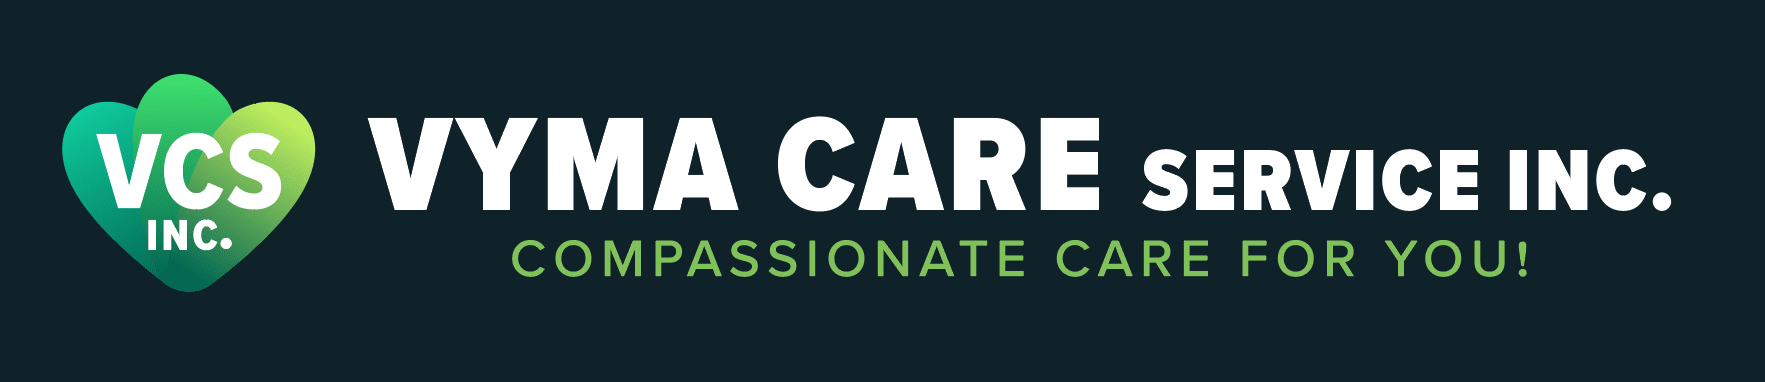 Vyma Care Services Inc. | Healthcare Staffing Professionals